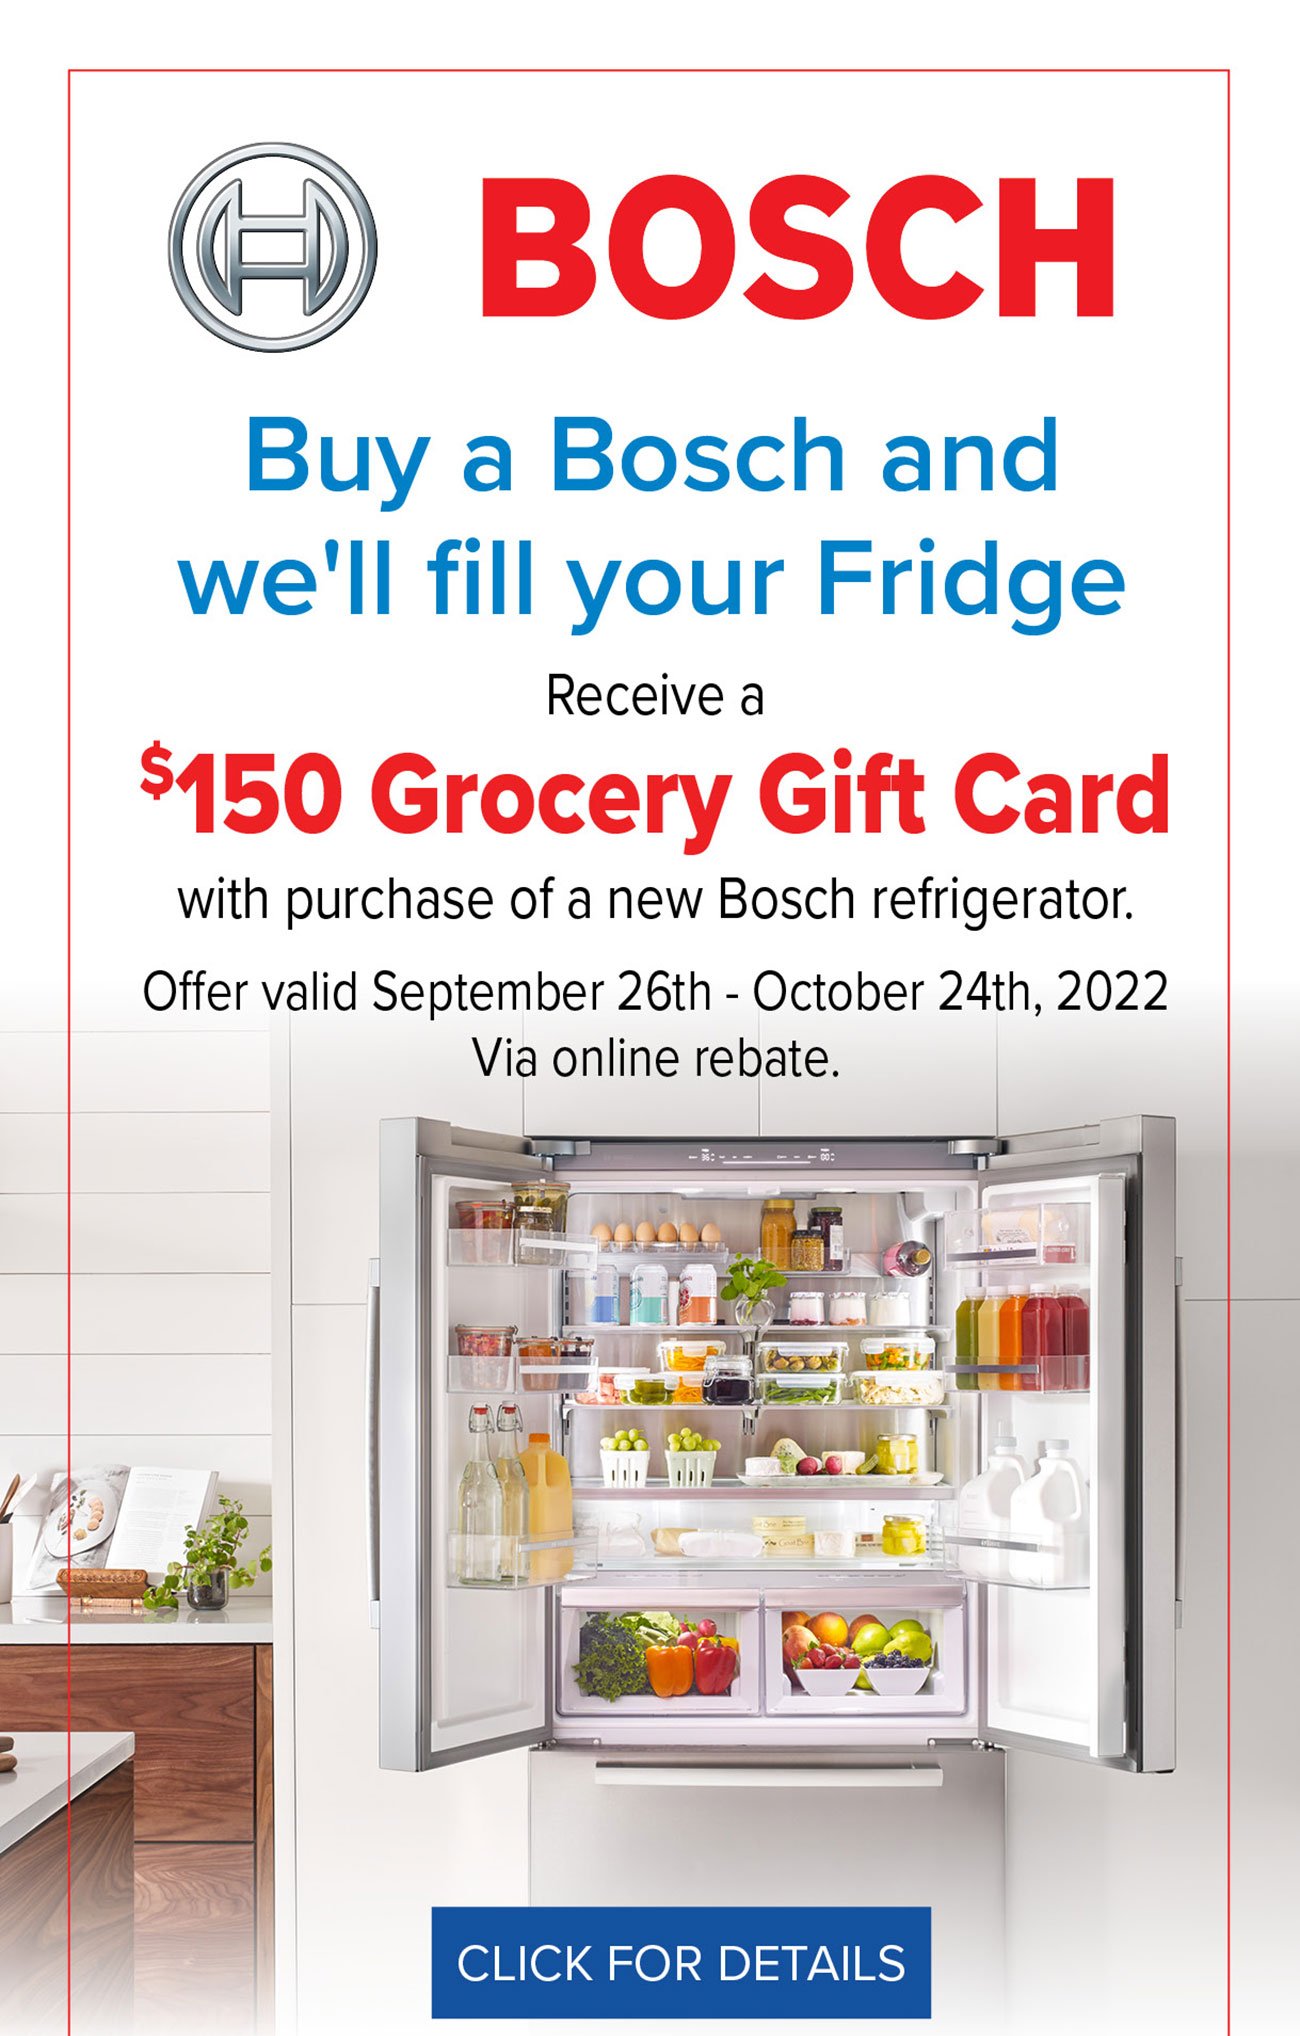  BOSCH Buy a Bosch and we'll fill your Fridge Receive a 150 Grocery Gift Card with purchase of a new Bosch refrigerator. Offer valid September 26th - October 24th, 2022 Via online rebate. CLICK FOR DETAILS 